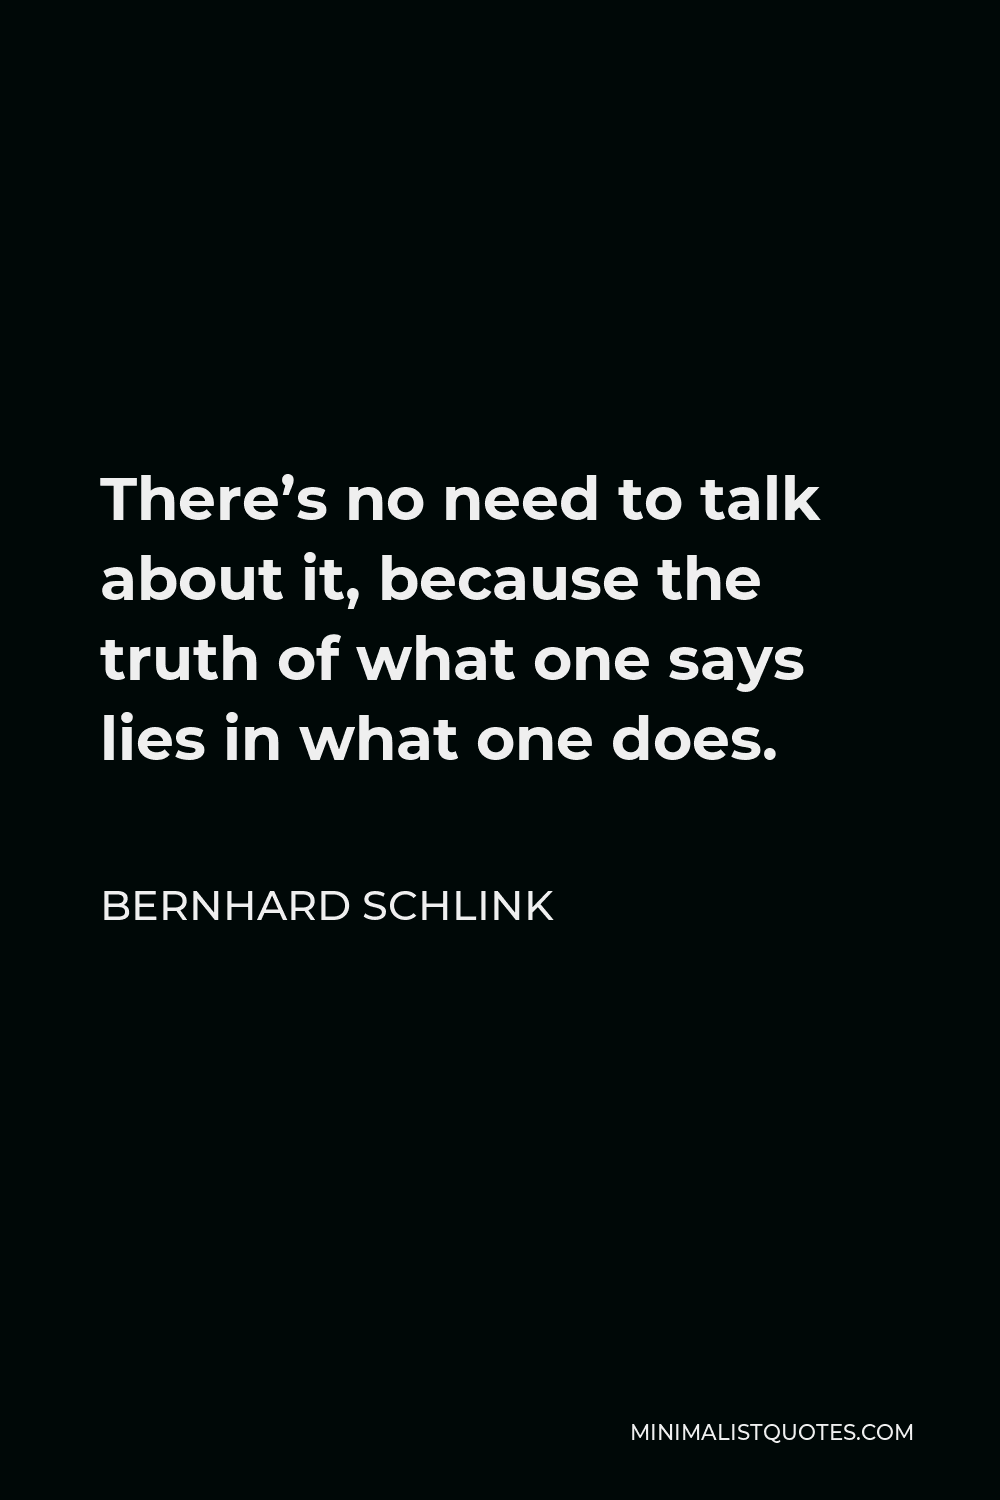 Bernhard Schlink Quote - There’s no need to talk about it, because the truth of what one says lies in what one does.